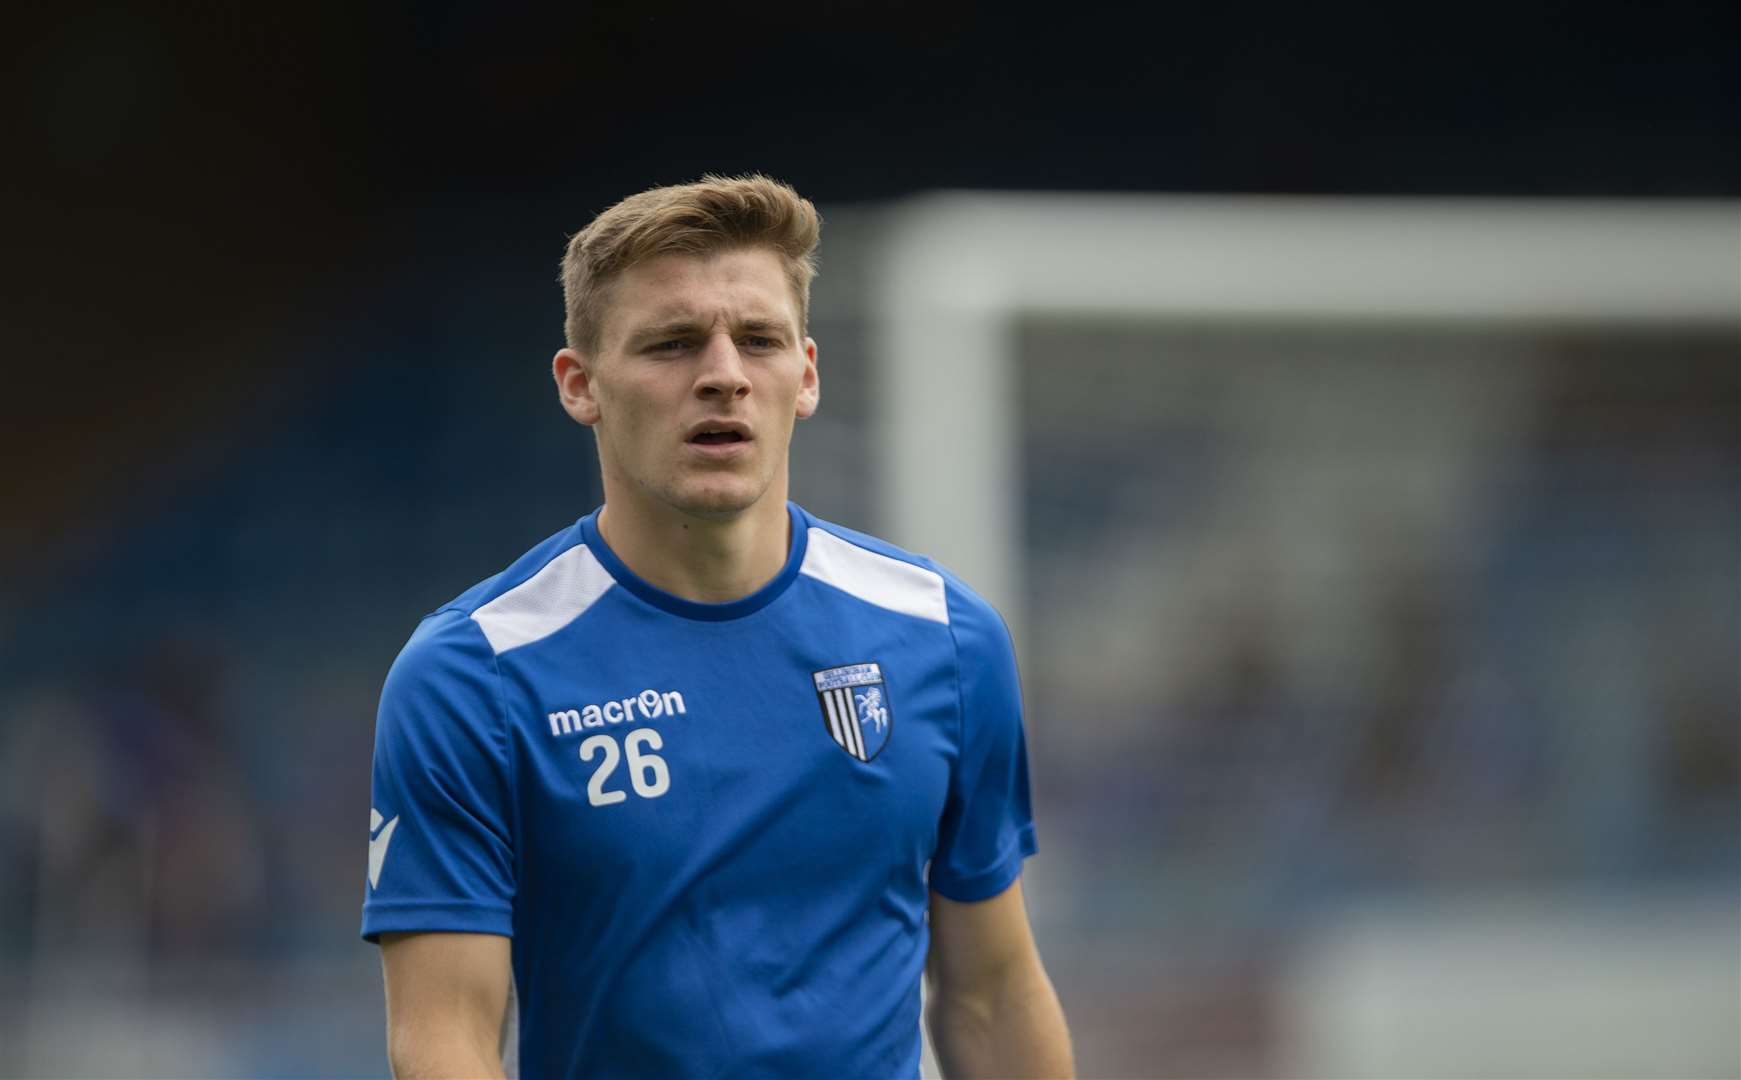 Henry Woods has signed a deal until summer 2021 at Gills